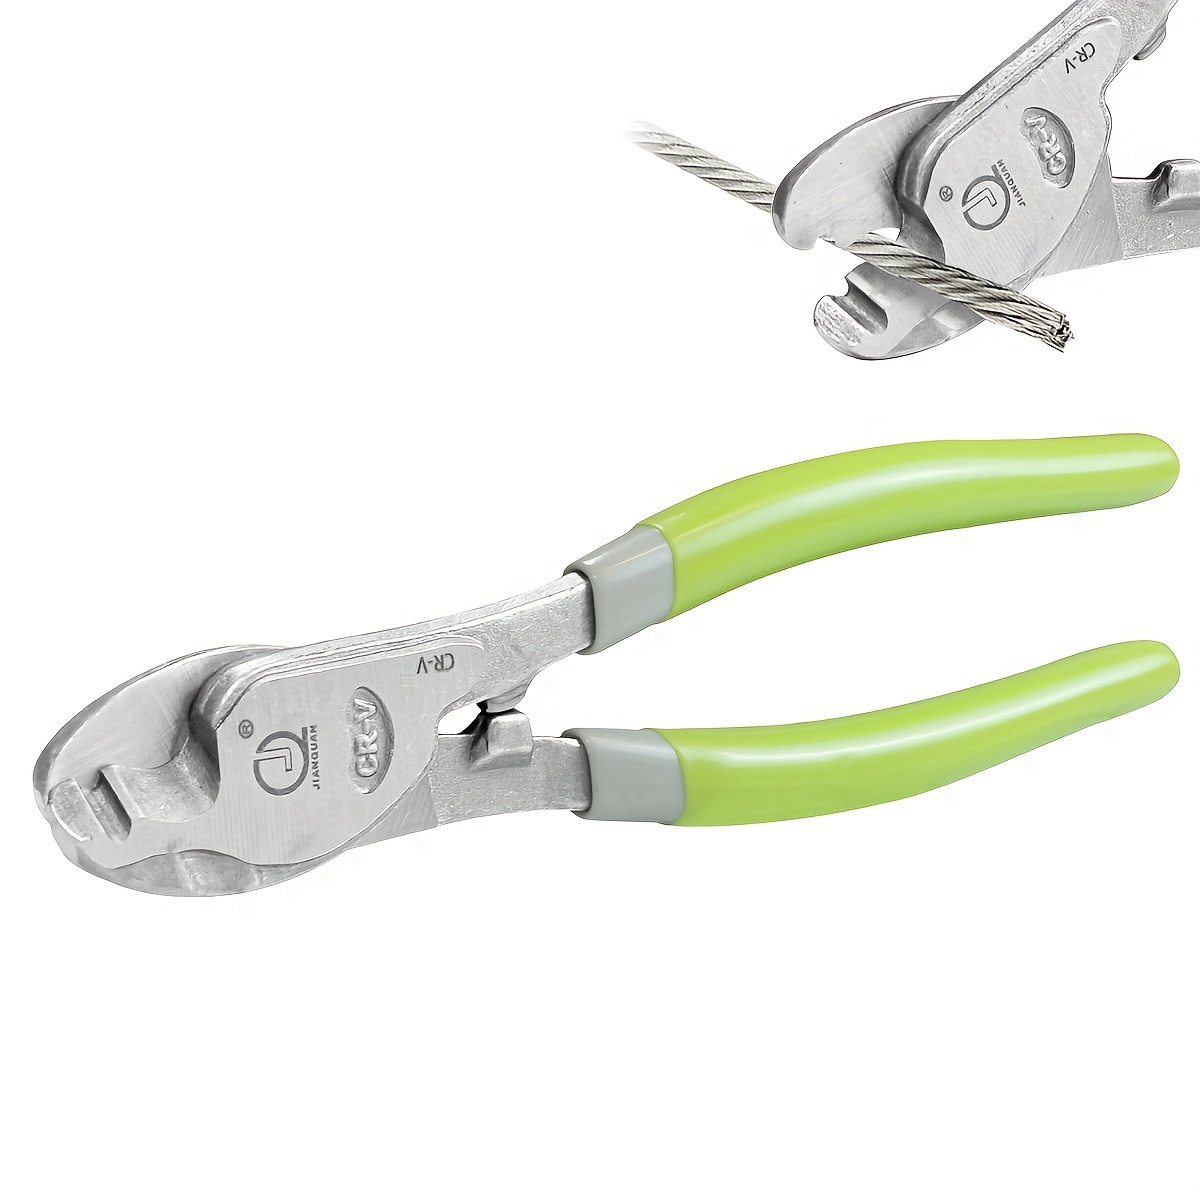 Cable Cutters Cr v Crimping Electrician Cutting Pliers Wire - Temu